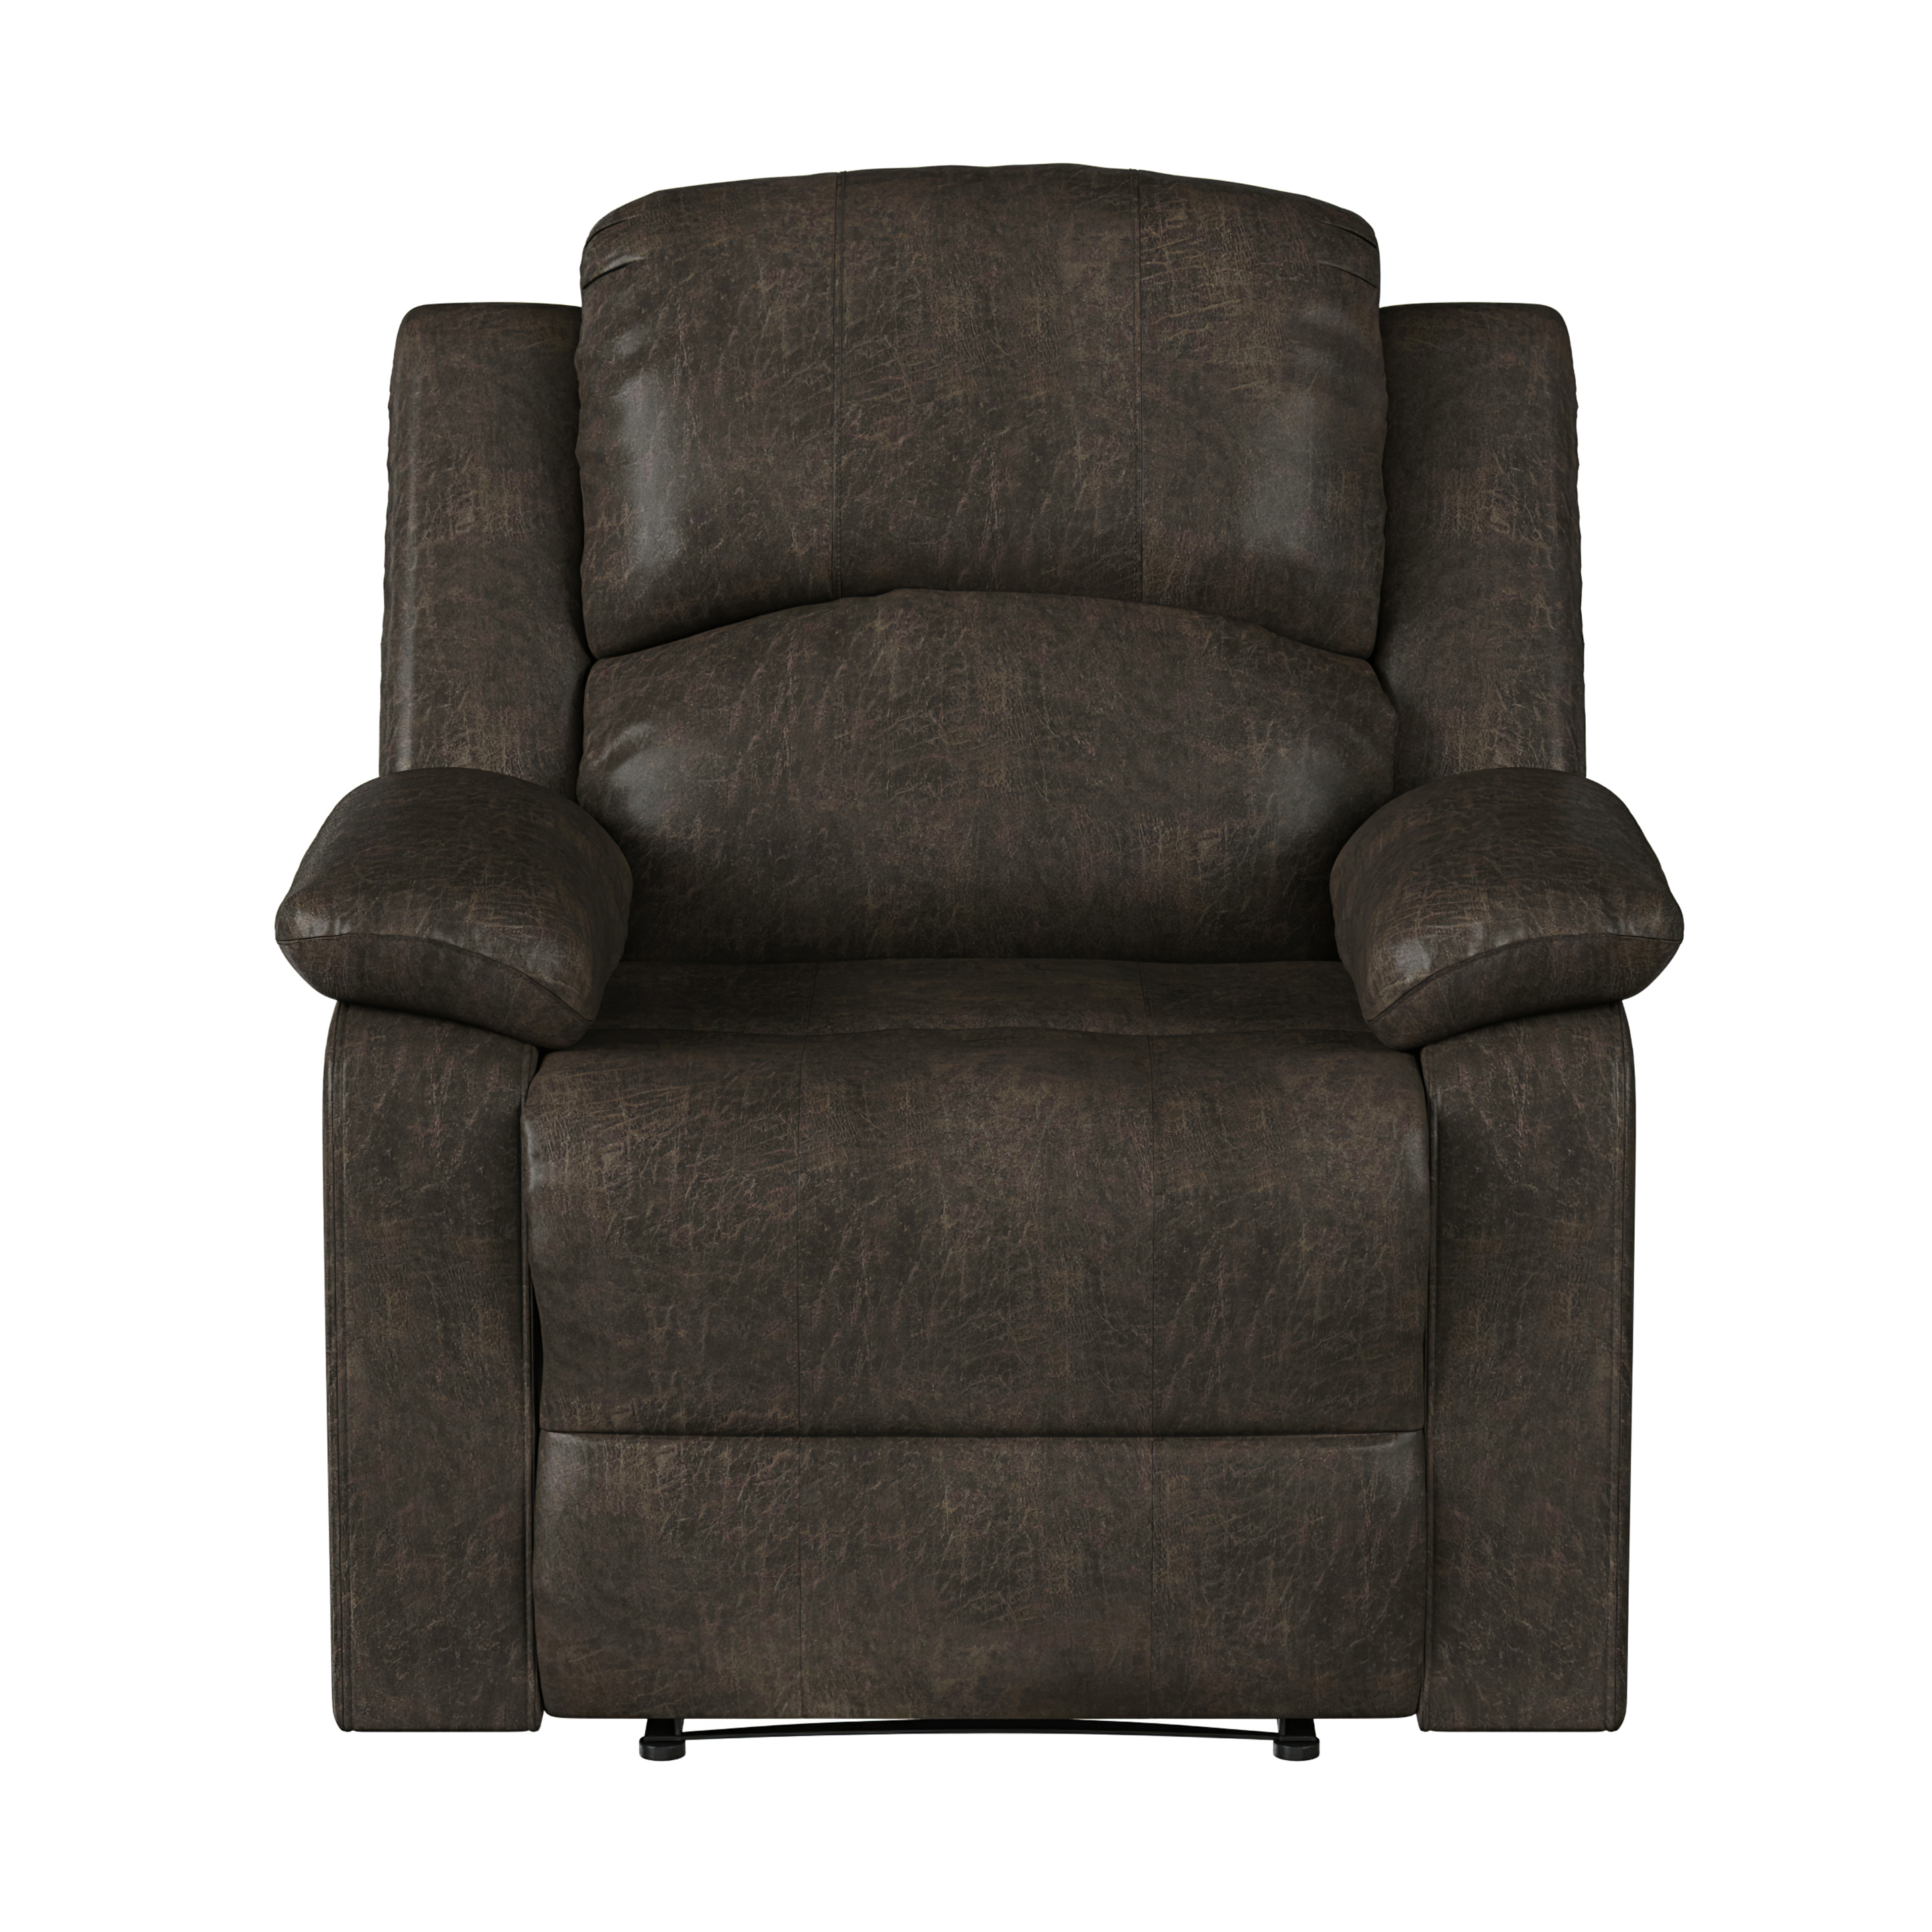 Relax-a-Lounger Reynolds Manual Standard Recliner, Brown Faux Suede - image 5 of 13